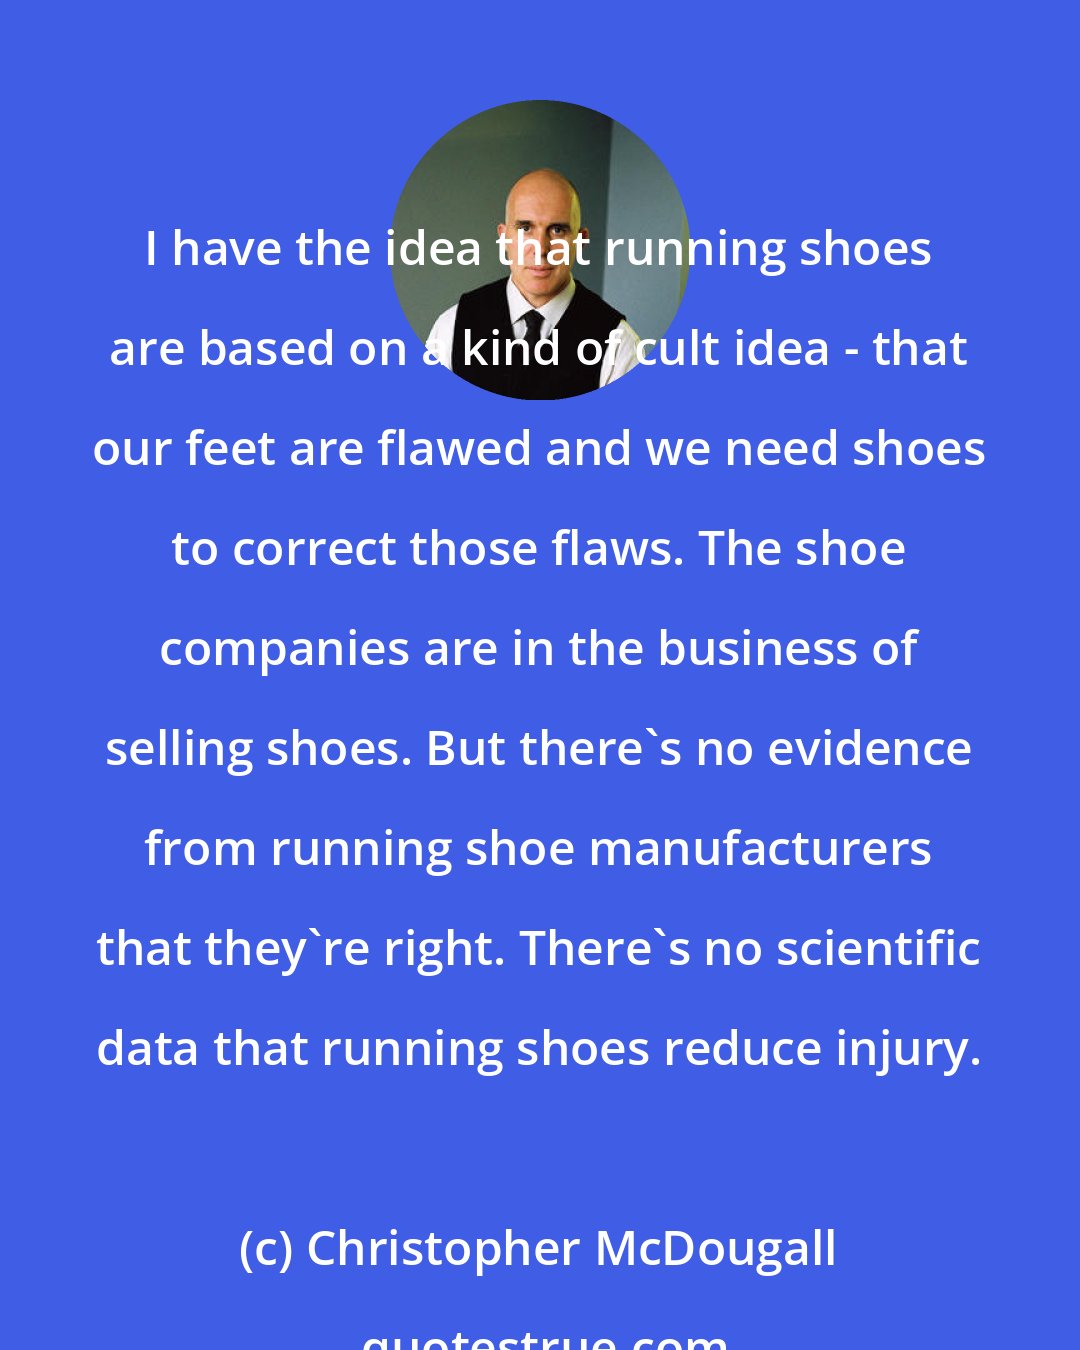 Christopher McDougall: I have the idea that running shoes are based on a kind of cult idea - that our feet are flawed and we need shoes to correct those flaws. The shoe companies are in the business of selling shoes. But there's no evidence from running shoe manufacturers that they're right. There's no scientific data that running shoes reduce injury.